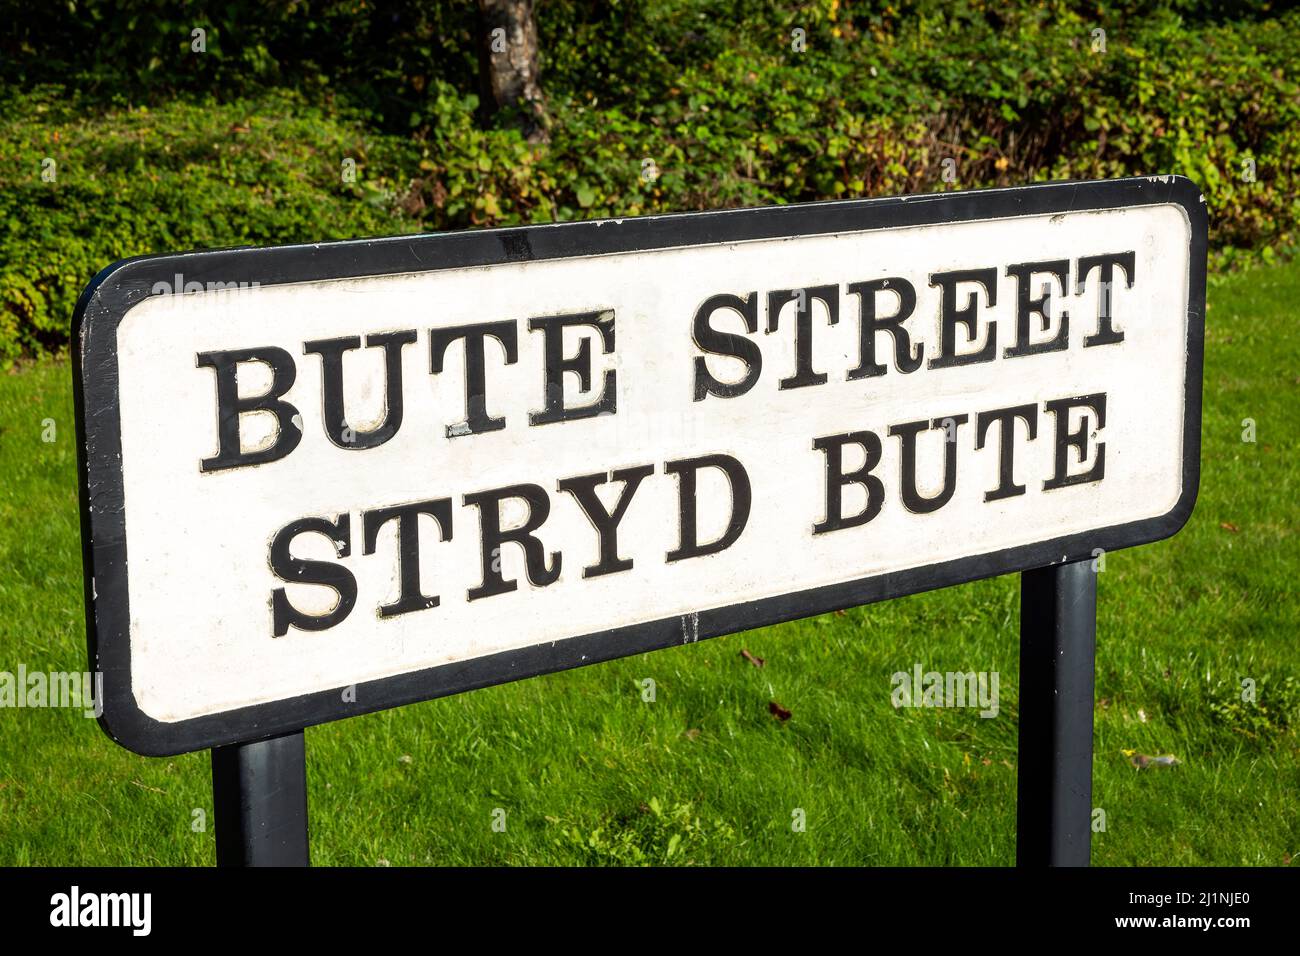 Bute street metal road sign in Cardiff Wales UK, stock photo image Stock Photo